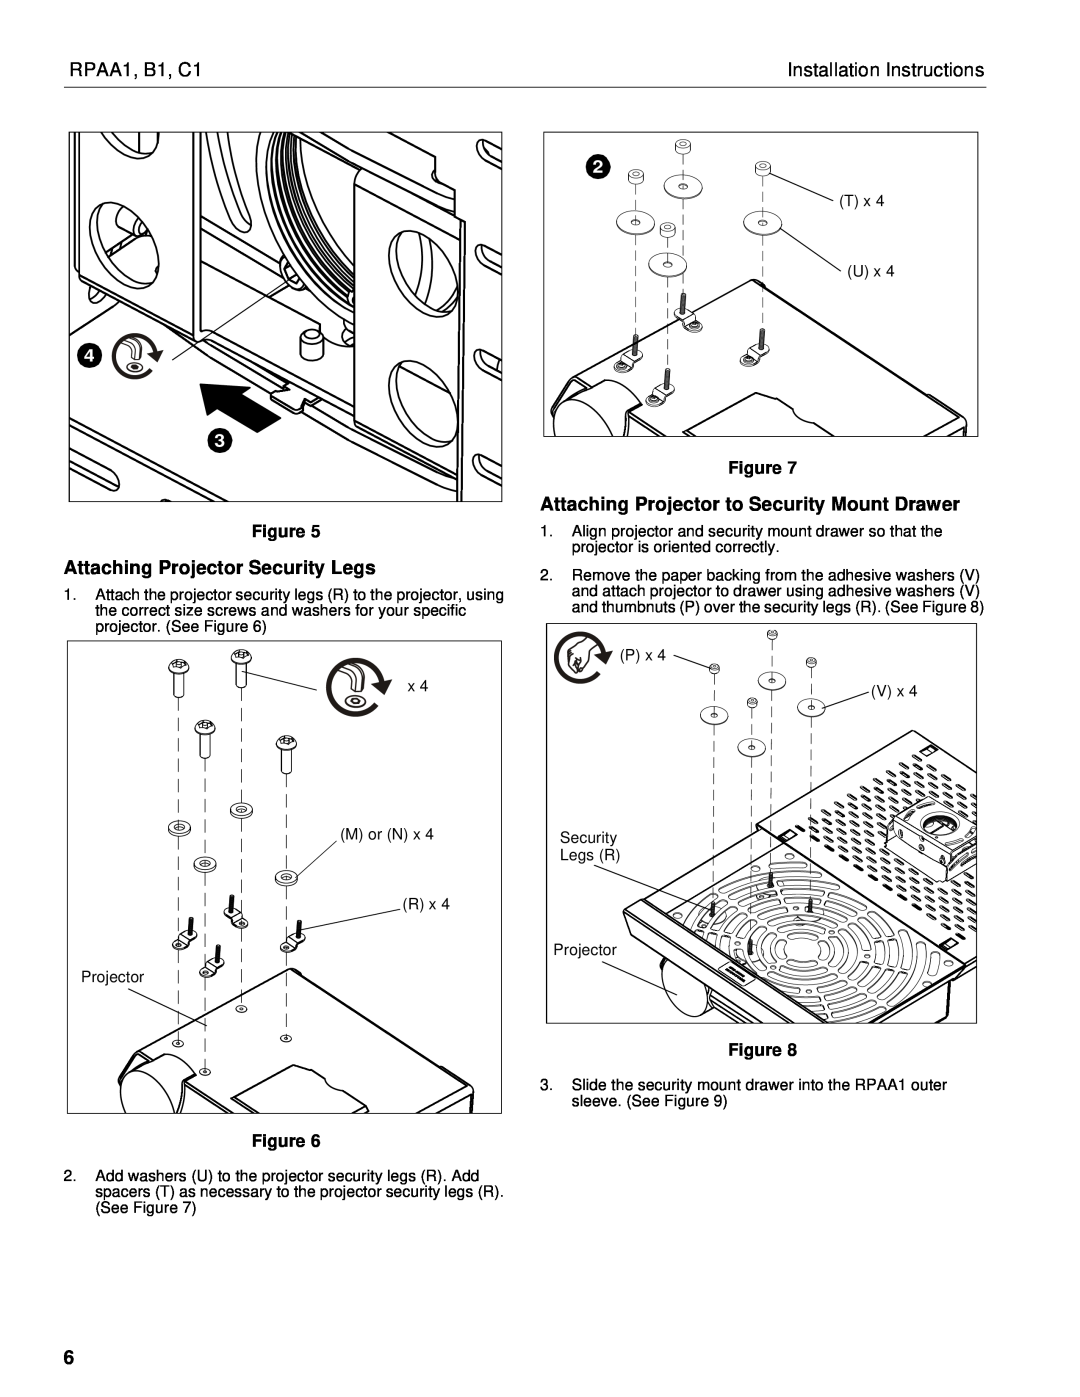 Chief Manufacturing Attaching Projector Security Legs, RPAA1, B1, C1, Installation Instructions 